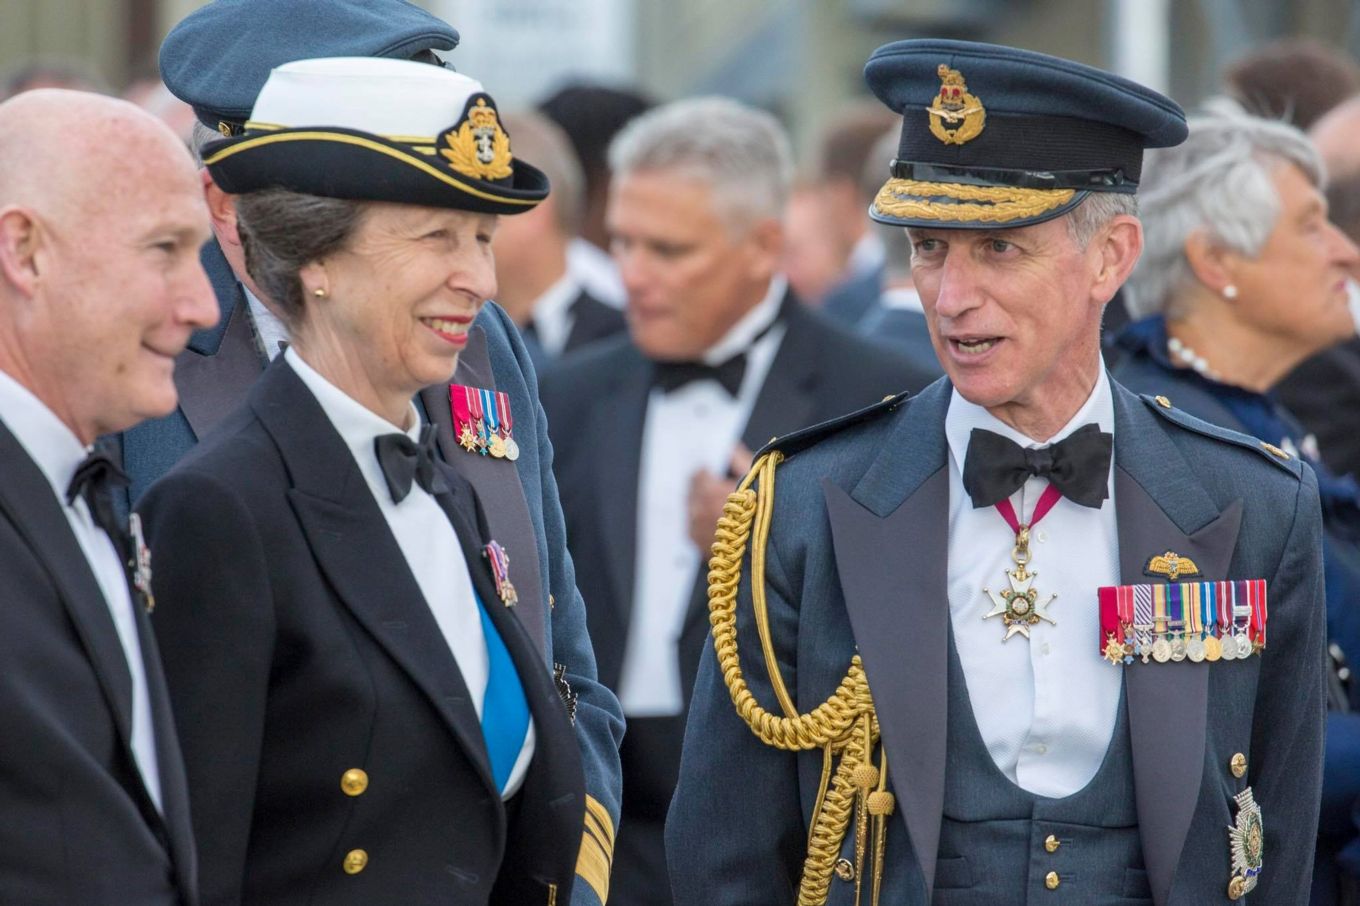 Princess Royal smiling, chats to Chief of the Air Staff